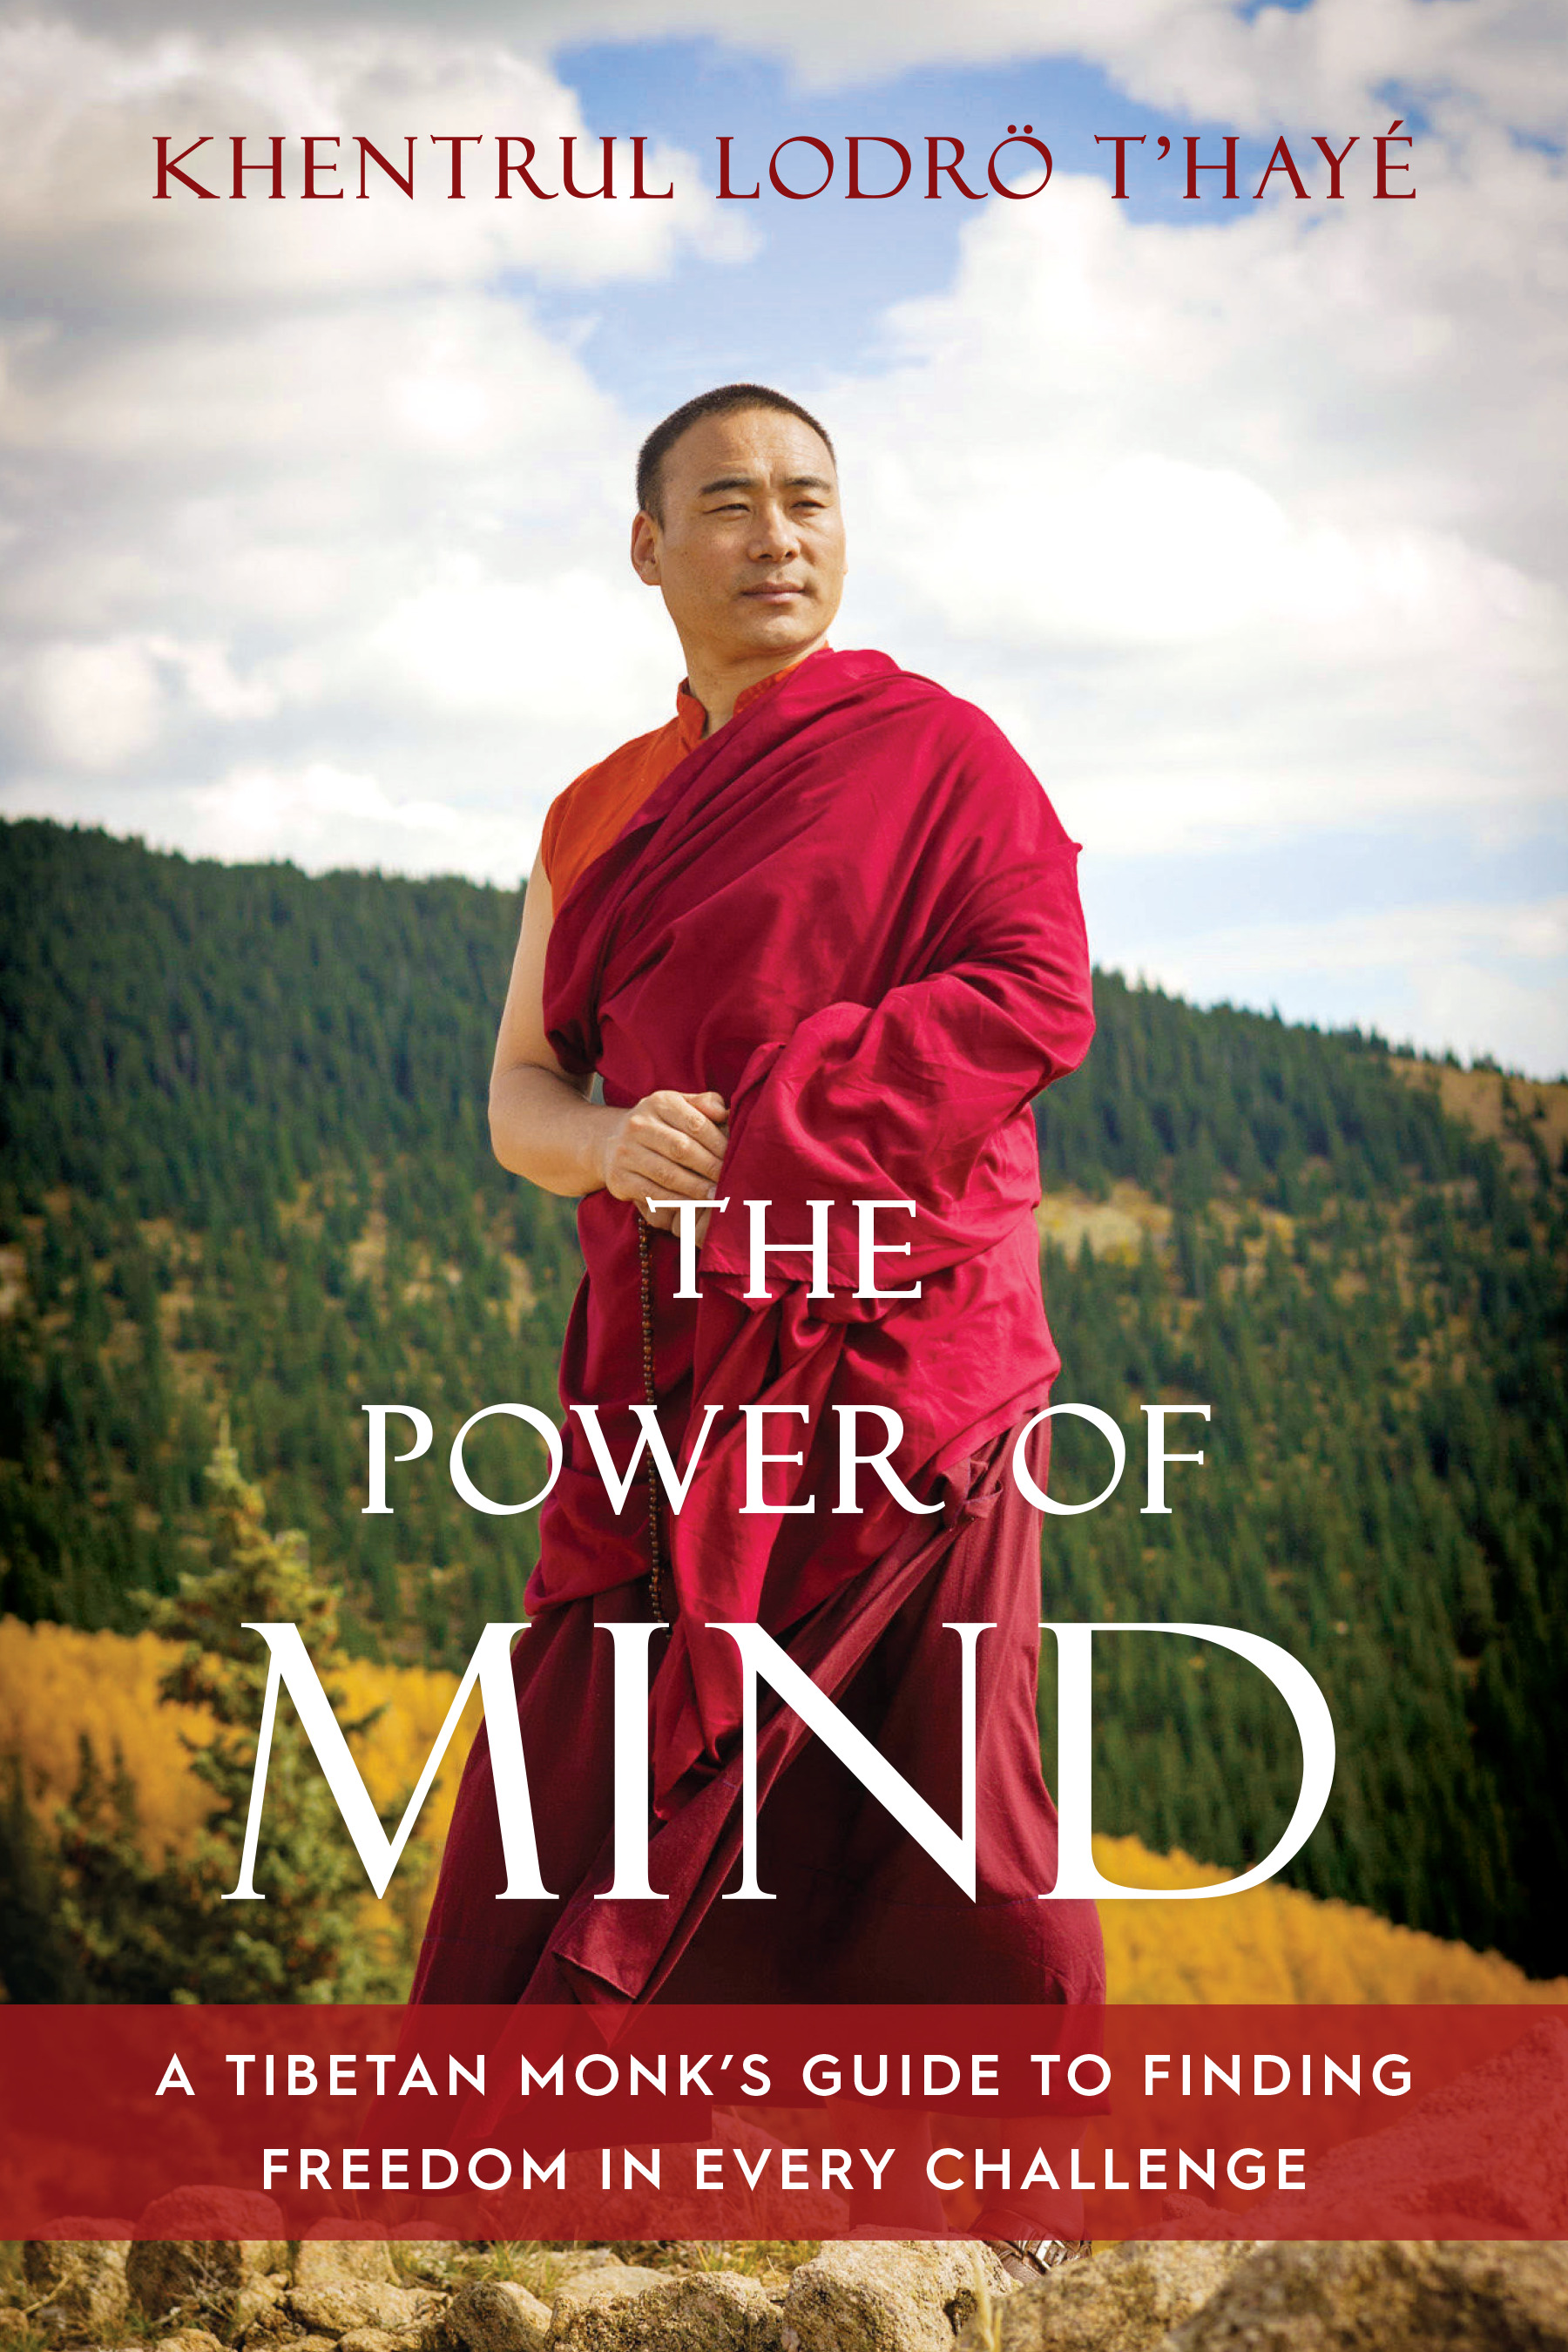 The Power of Mind : A Tibetan Monk's Guide to Finding Freedom in Every Challenge | T'haye, Khentrul Lodro